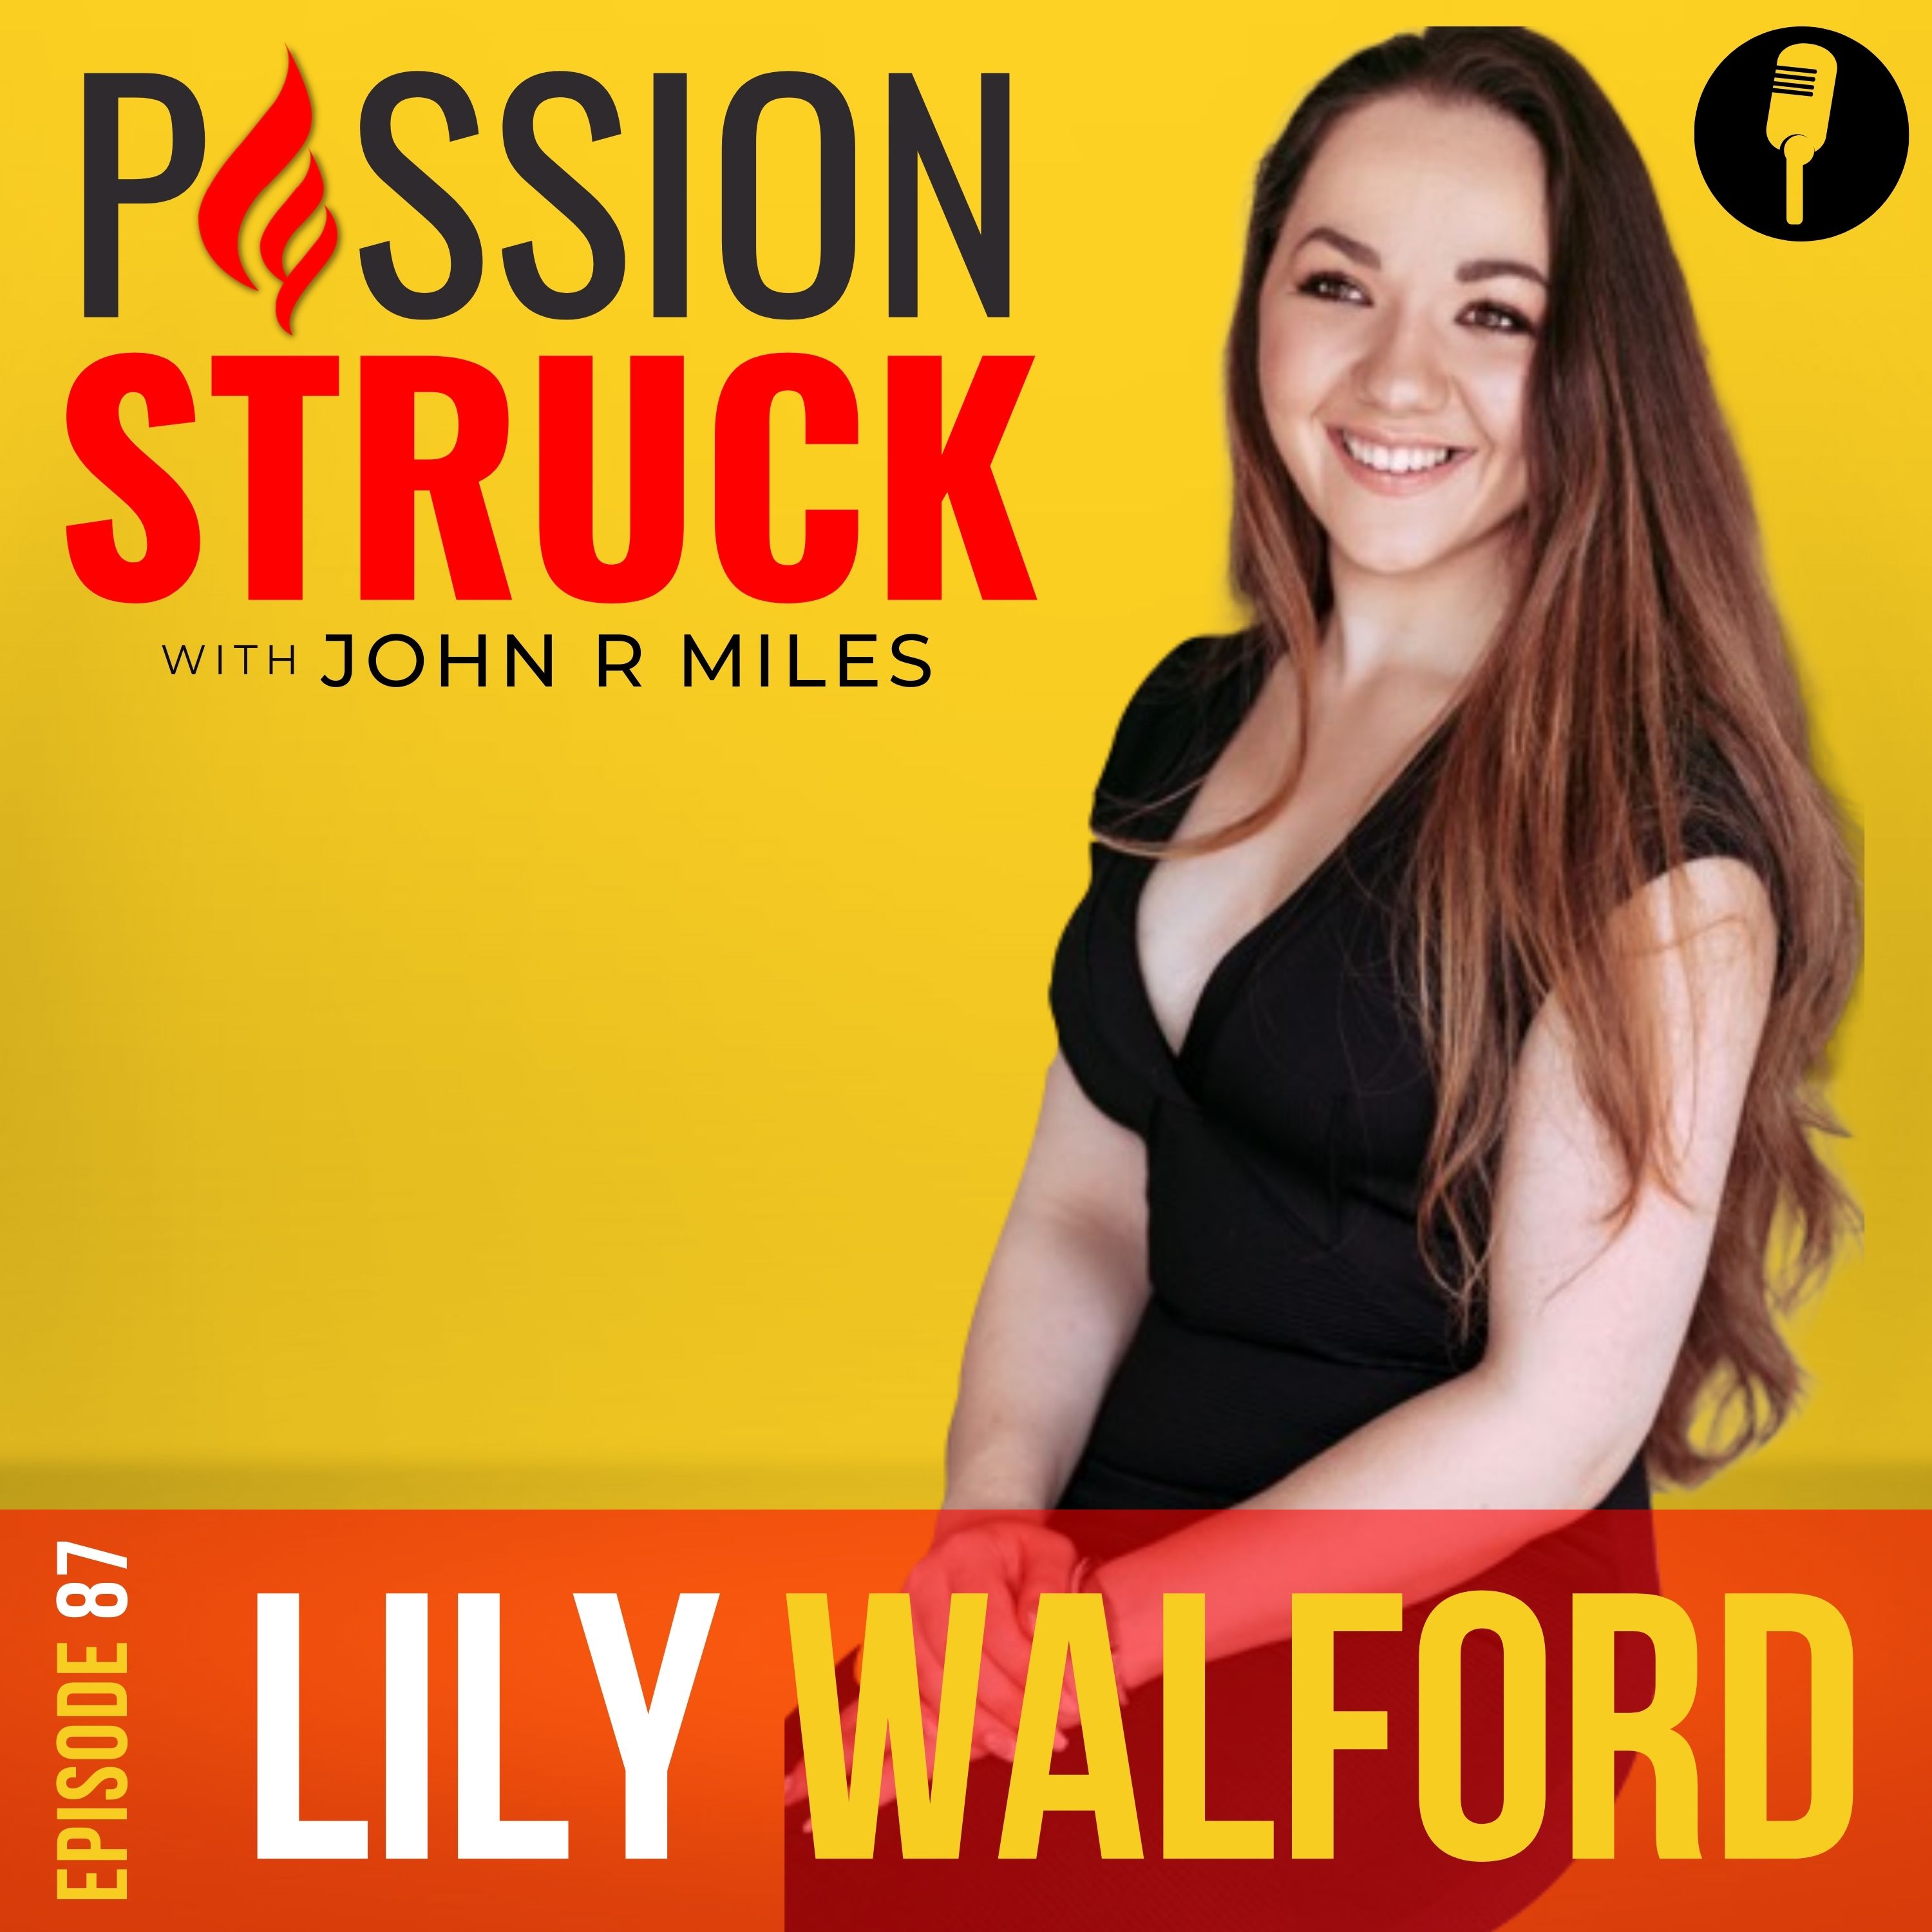 Passion-Struck-Podcast-Episode-87-with-Lily Walford